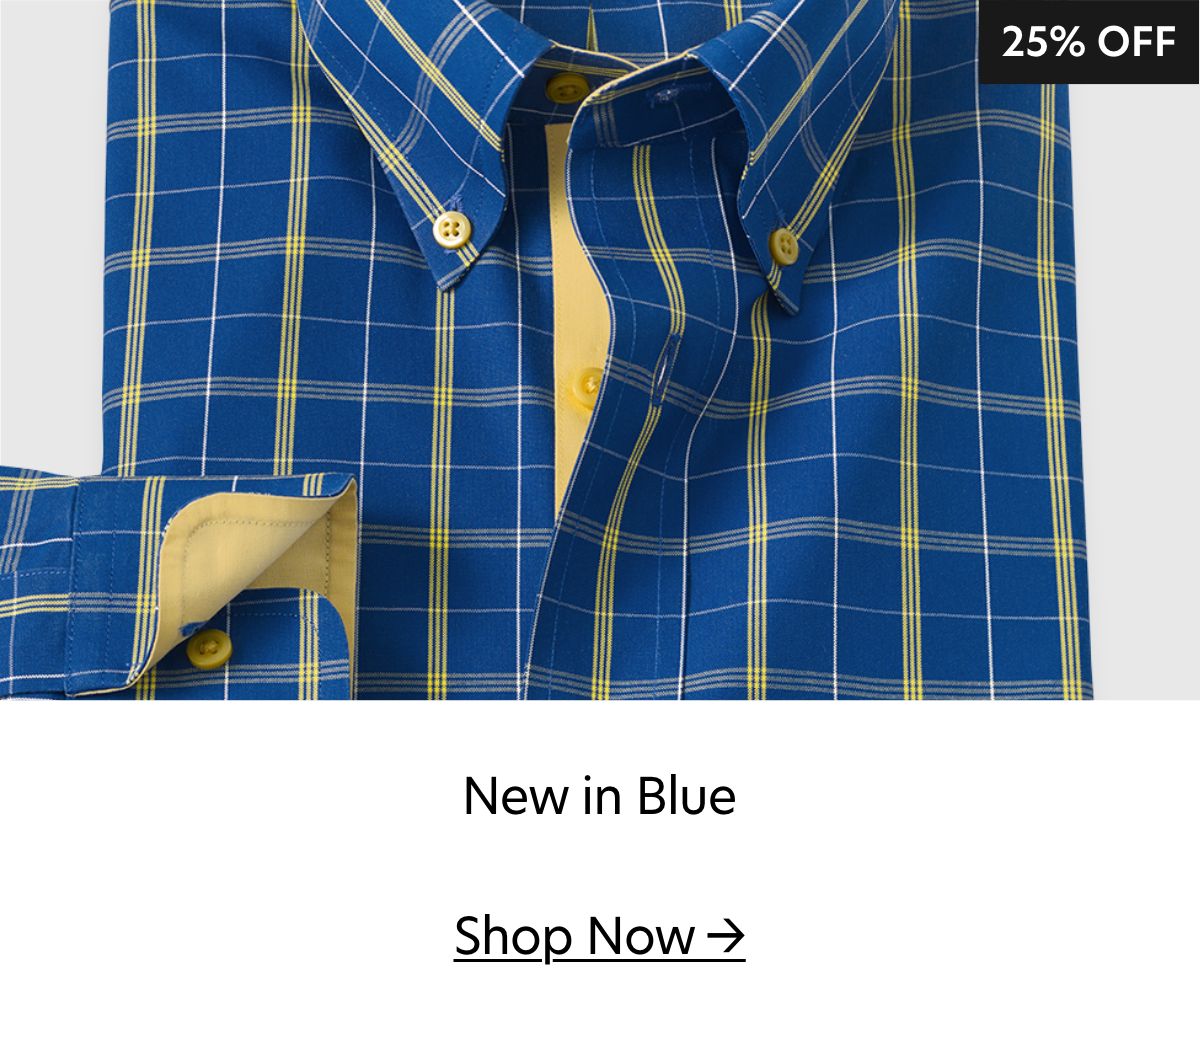  25% OFF New in Blue Shop Now 